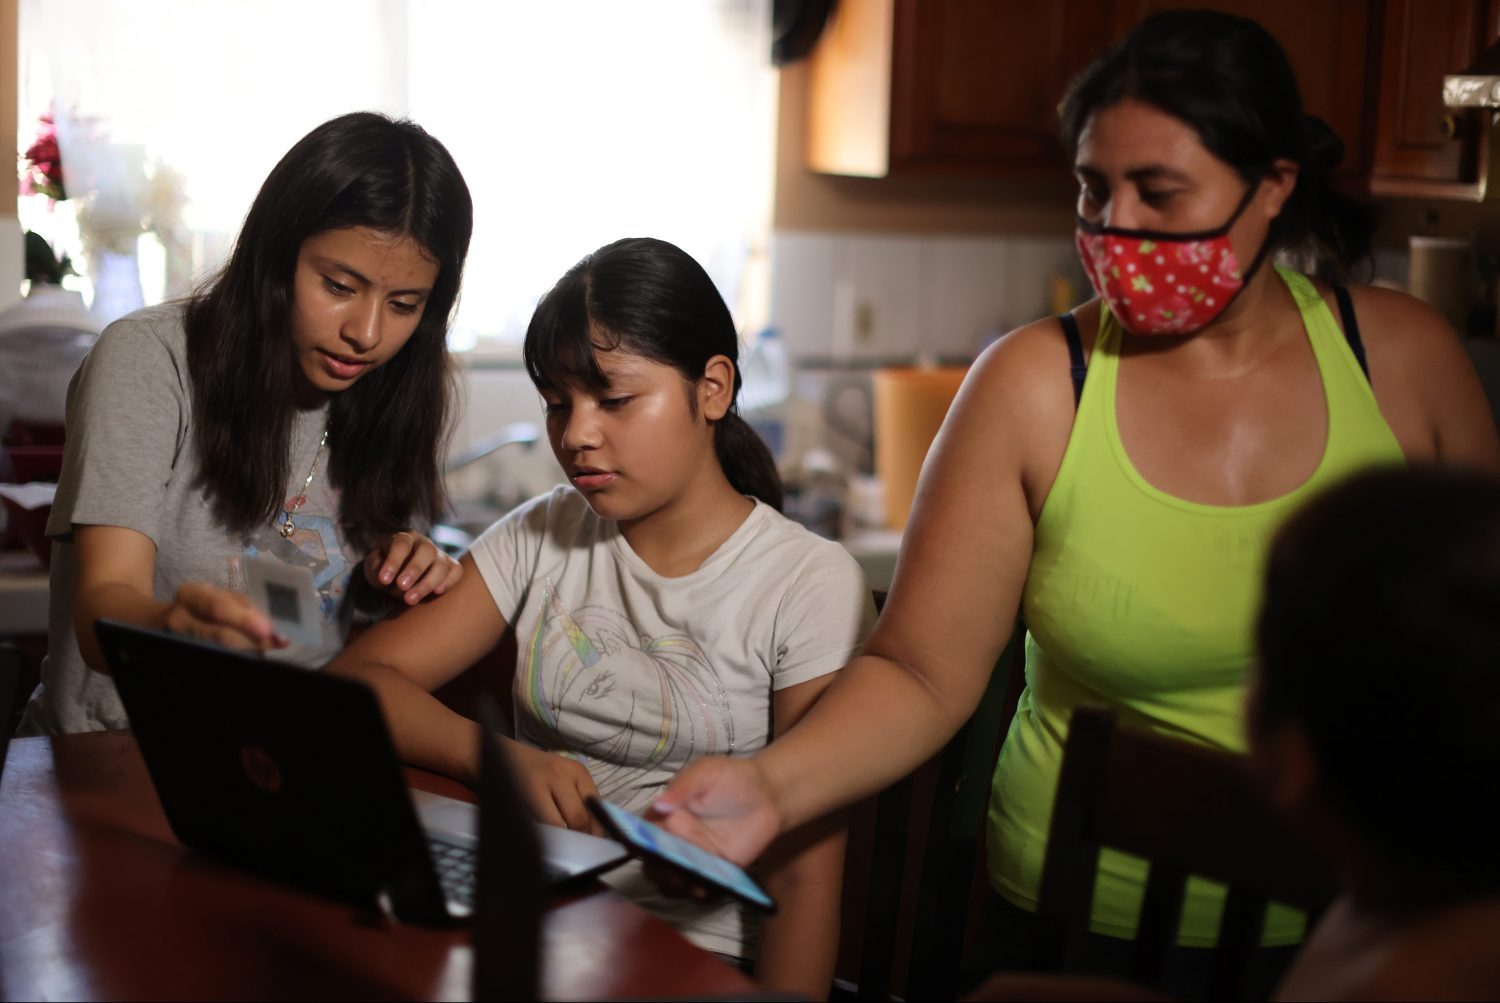 Los Angeles Unified School District (LAUSD) students Keiley Flores, 13, Andrea Ramos, 10, and Alexander Ramos, 8, work on school-issued computers with unreliable internet connectivity, as their mother Anely Solis, 32, tries to connect them to her mobile hotspot, during the global outbreak of the coronavirus disease (COVID-19), at their home in Los Angeles, California, U.S., August 18, 2020.  REUTERS/Lucy Nicholson